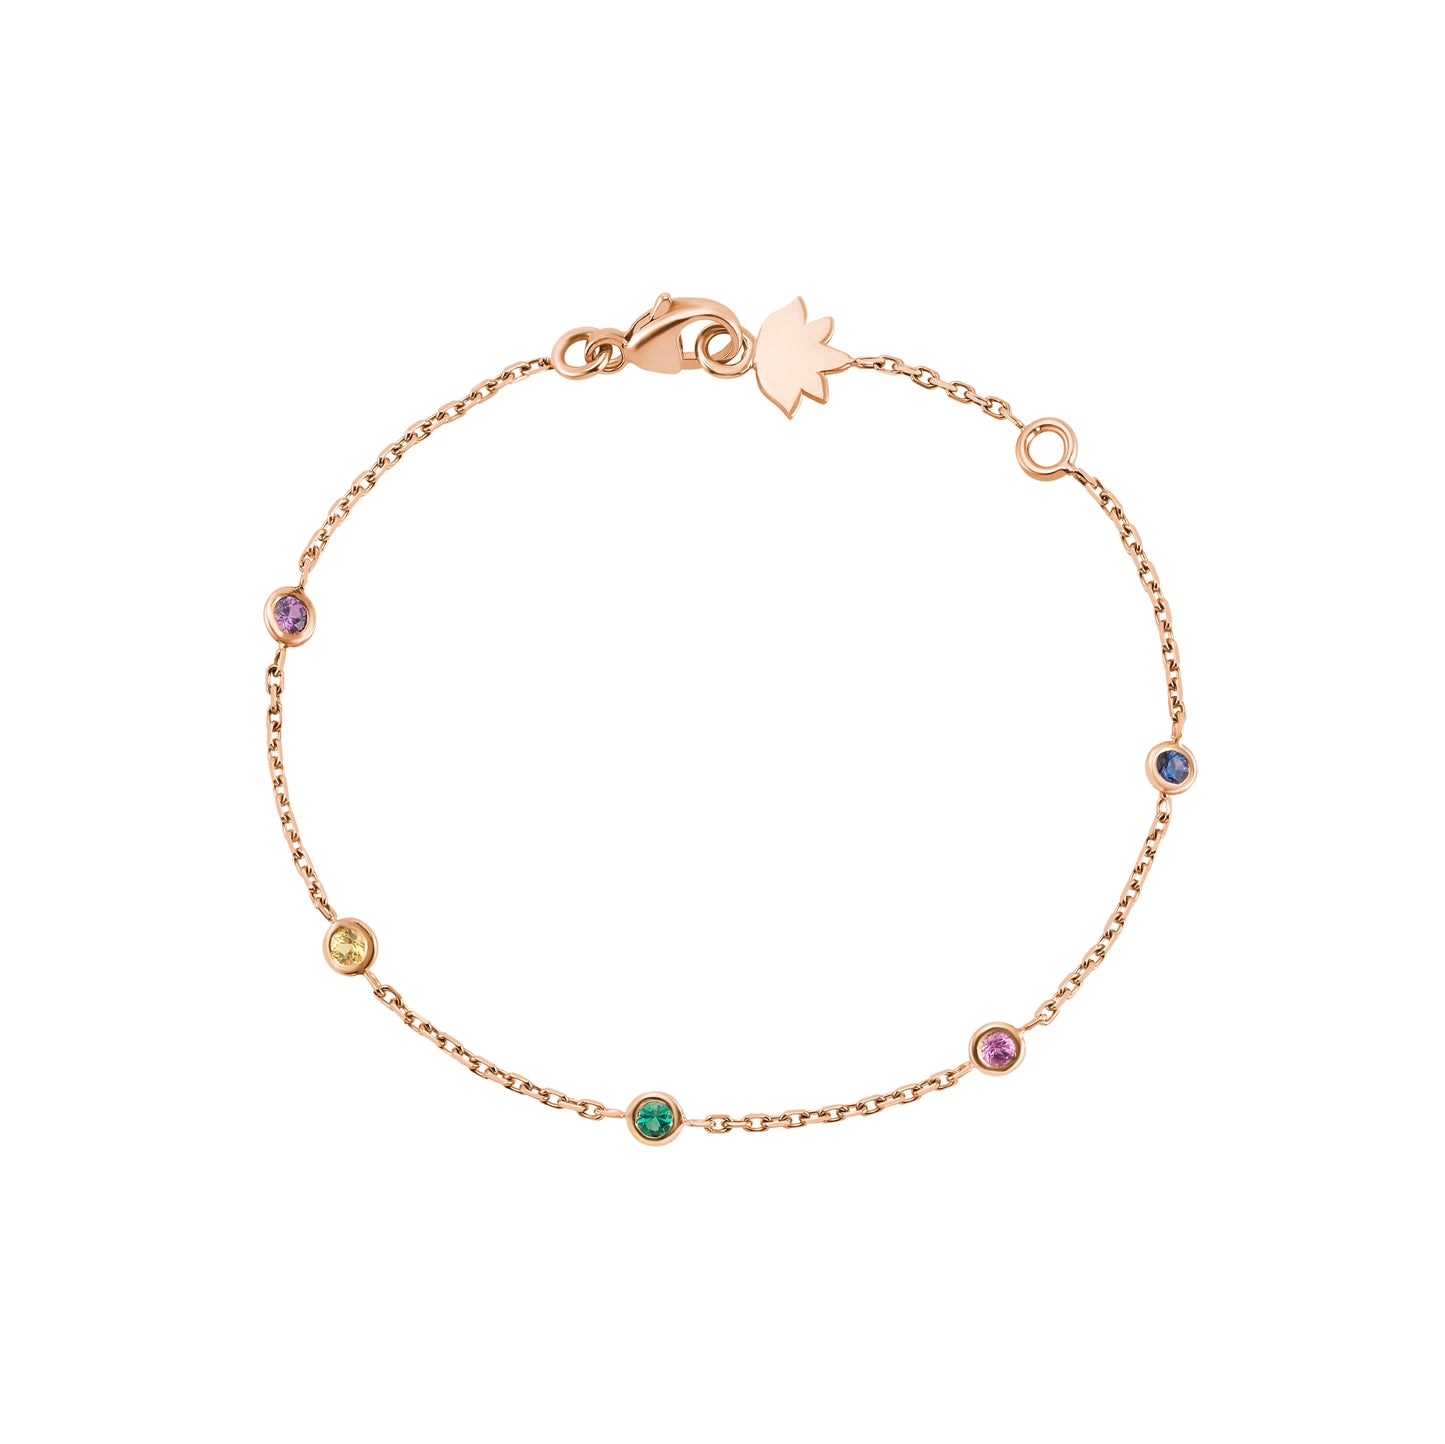 Constellation Bracelet - 750/1000 pink gold, emerald, and sapphires